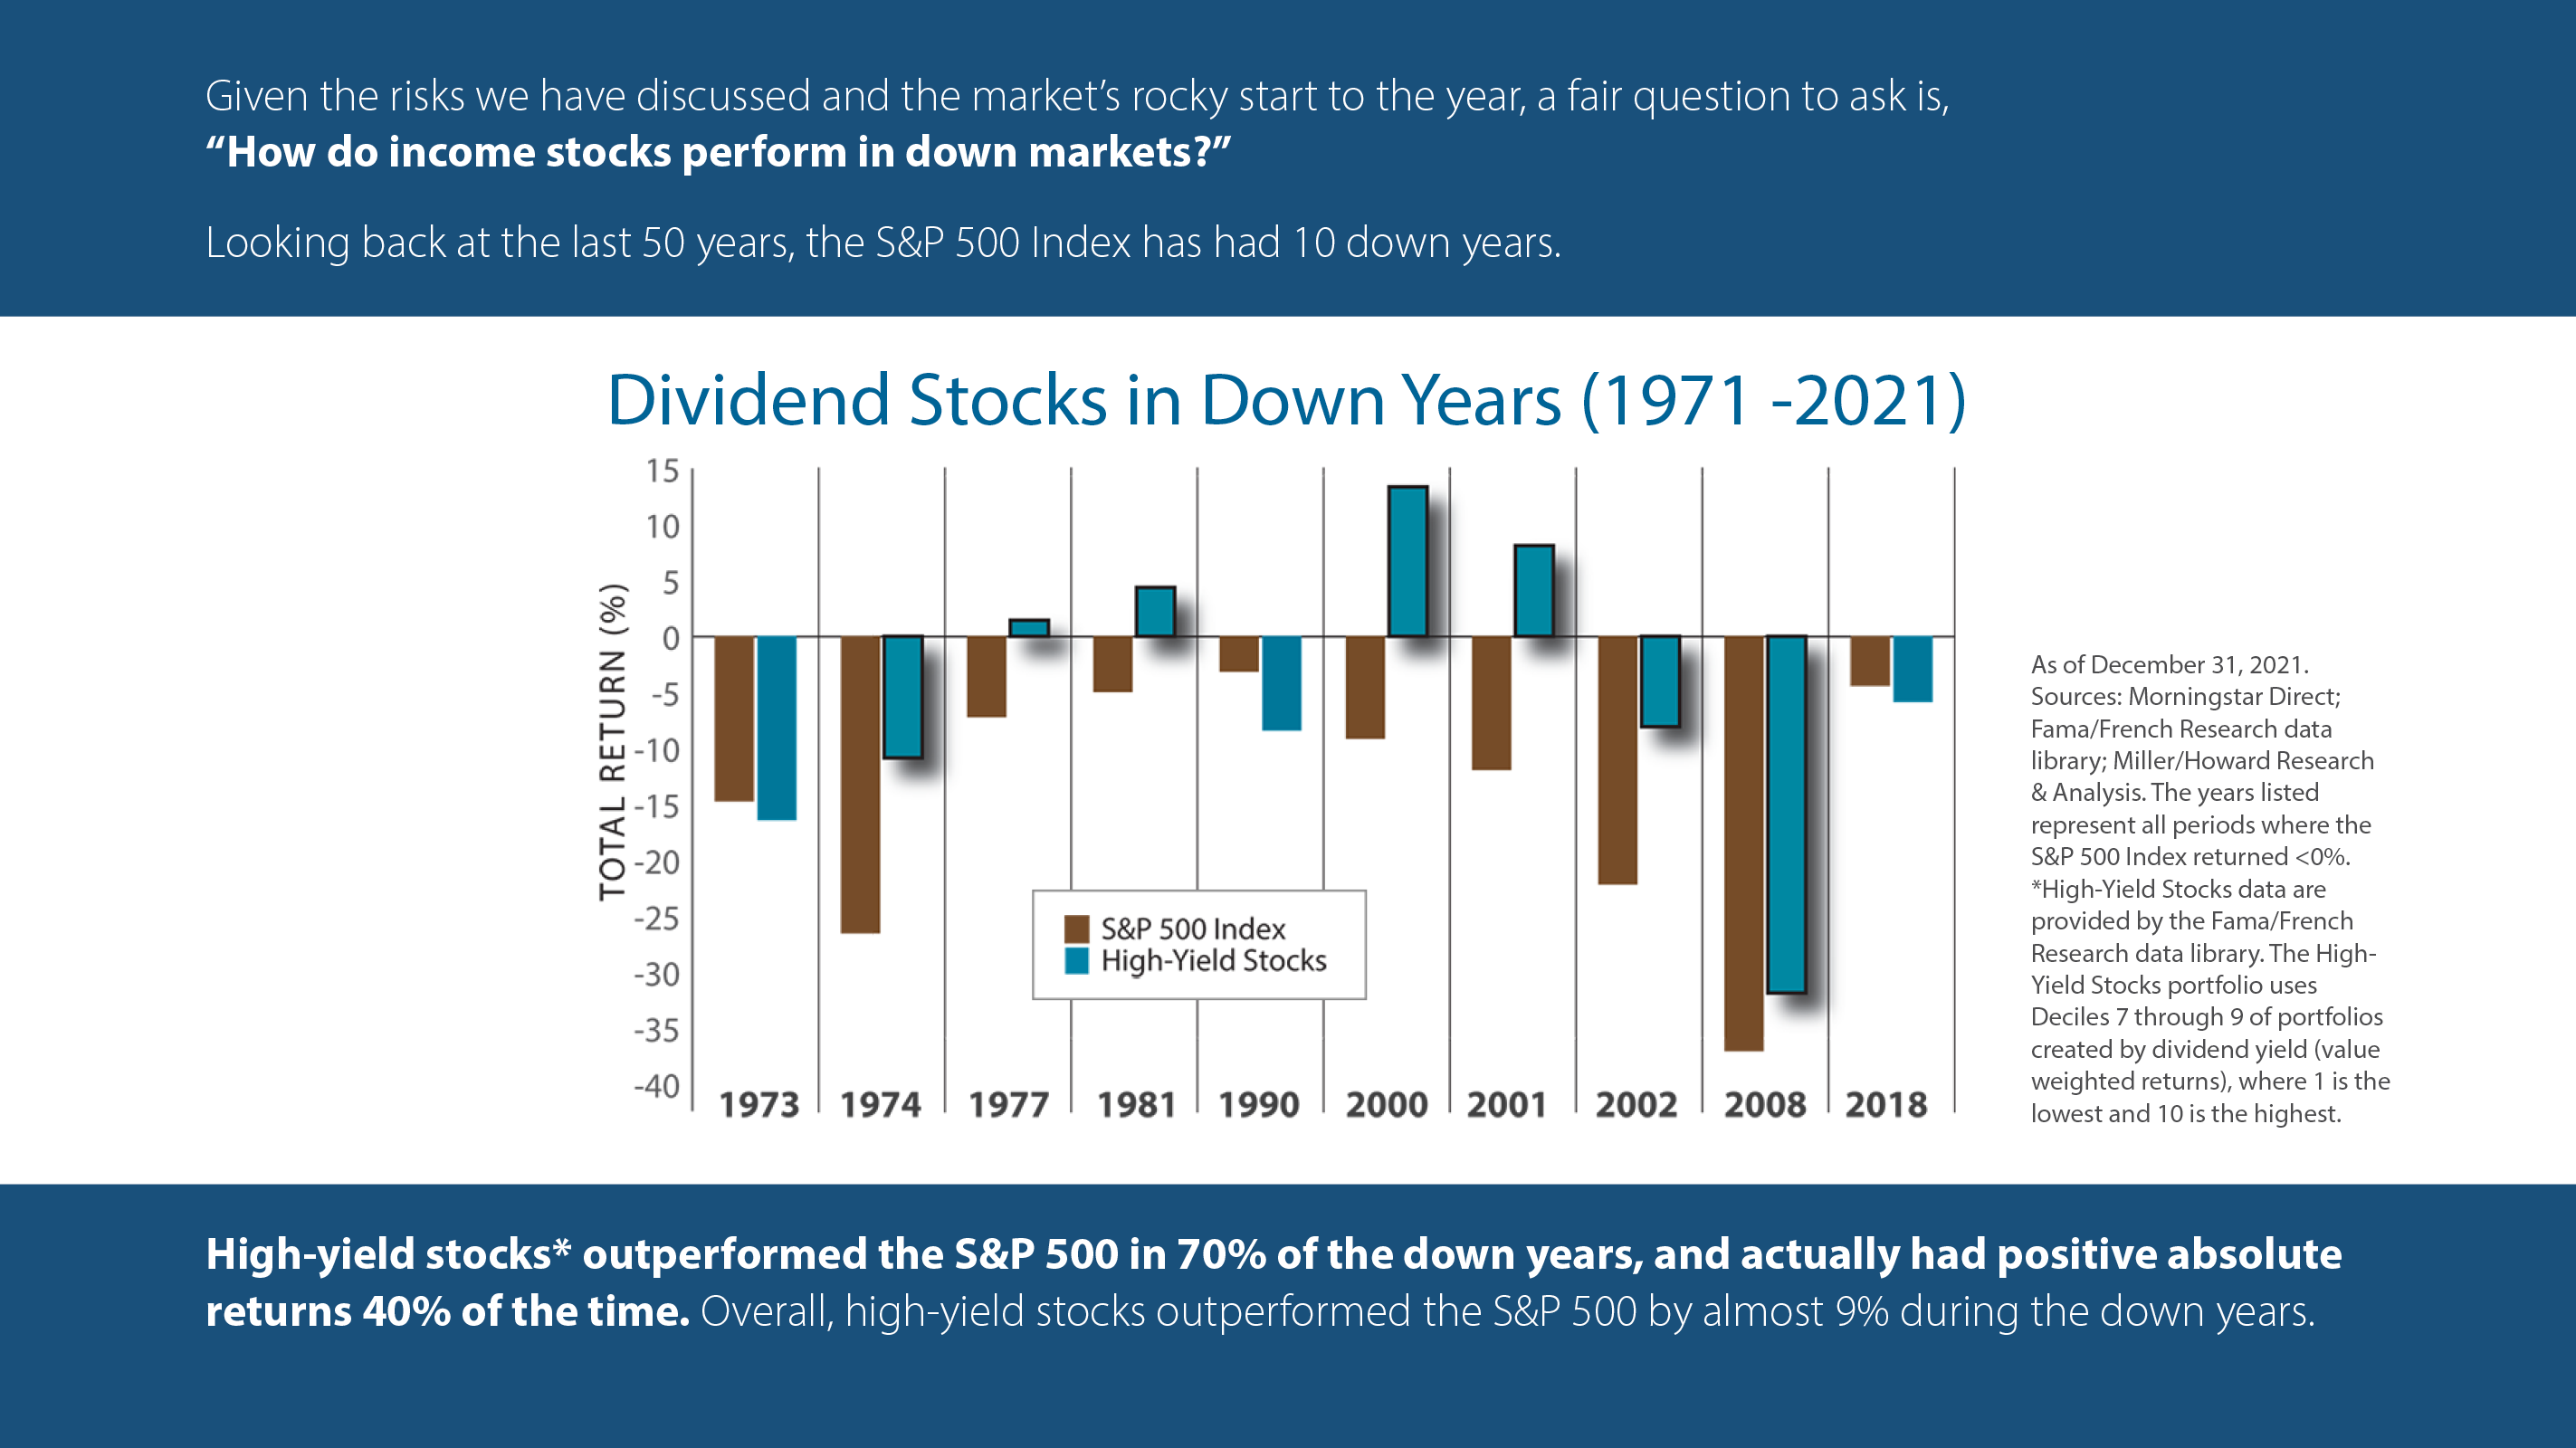 Dividend Stocks in Down Years